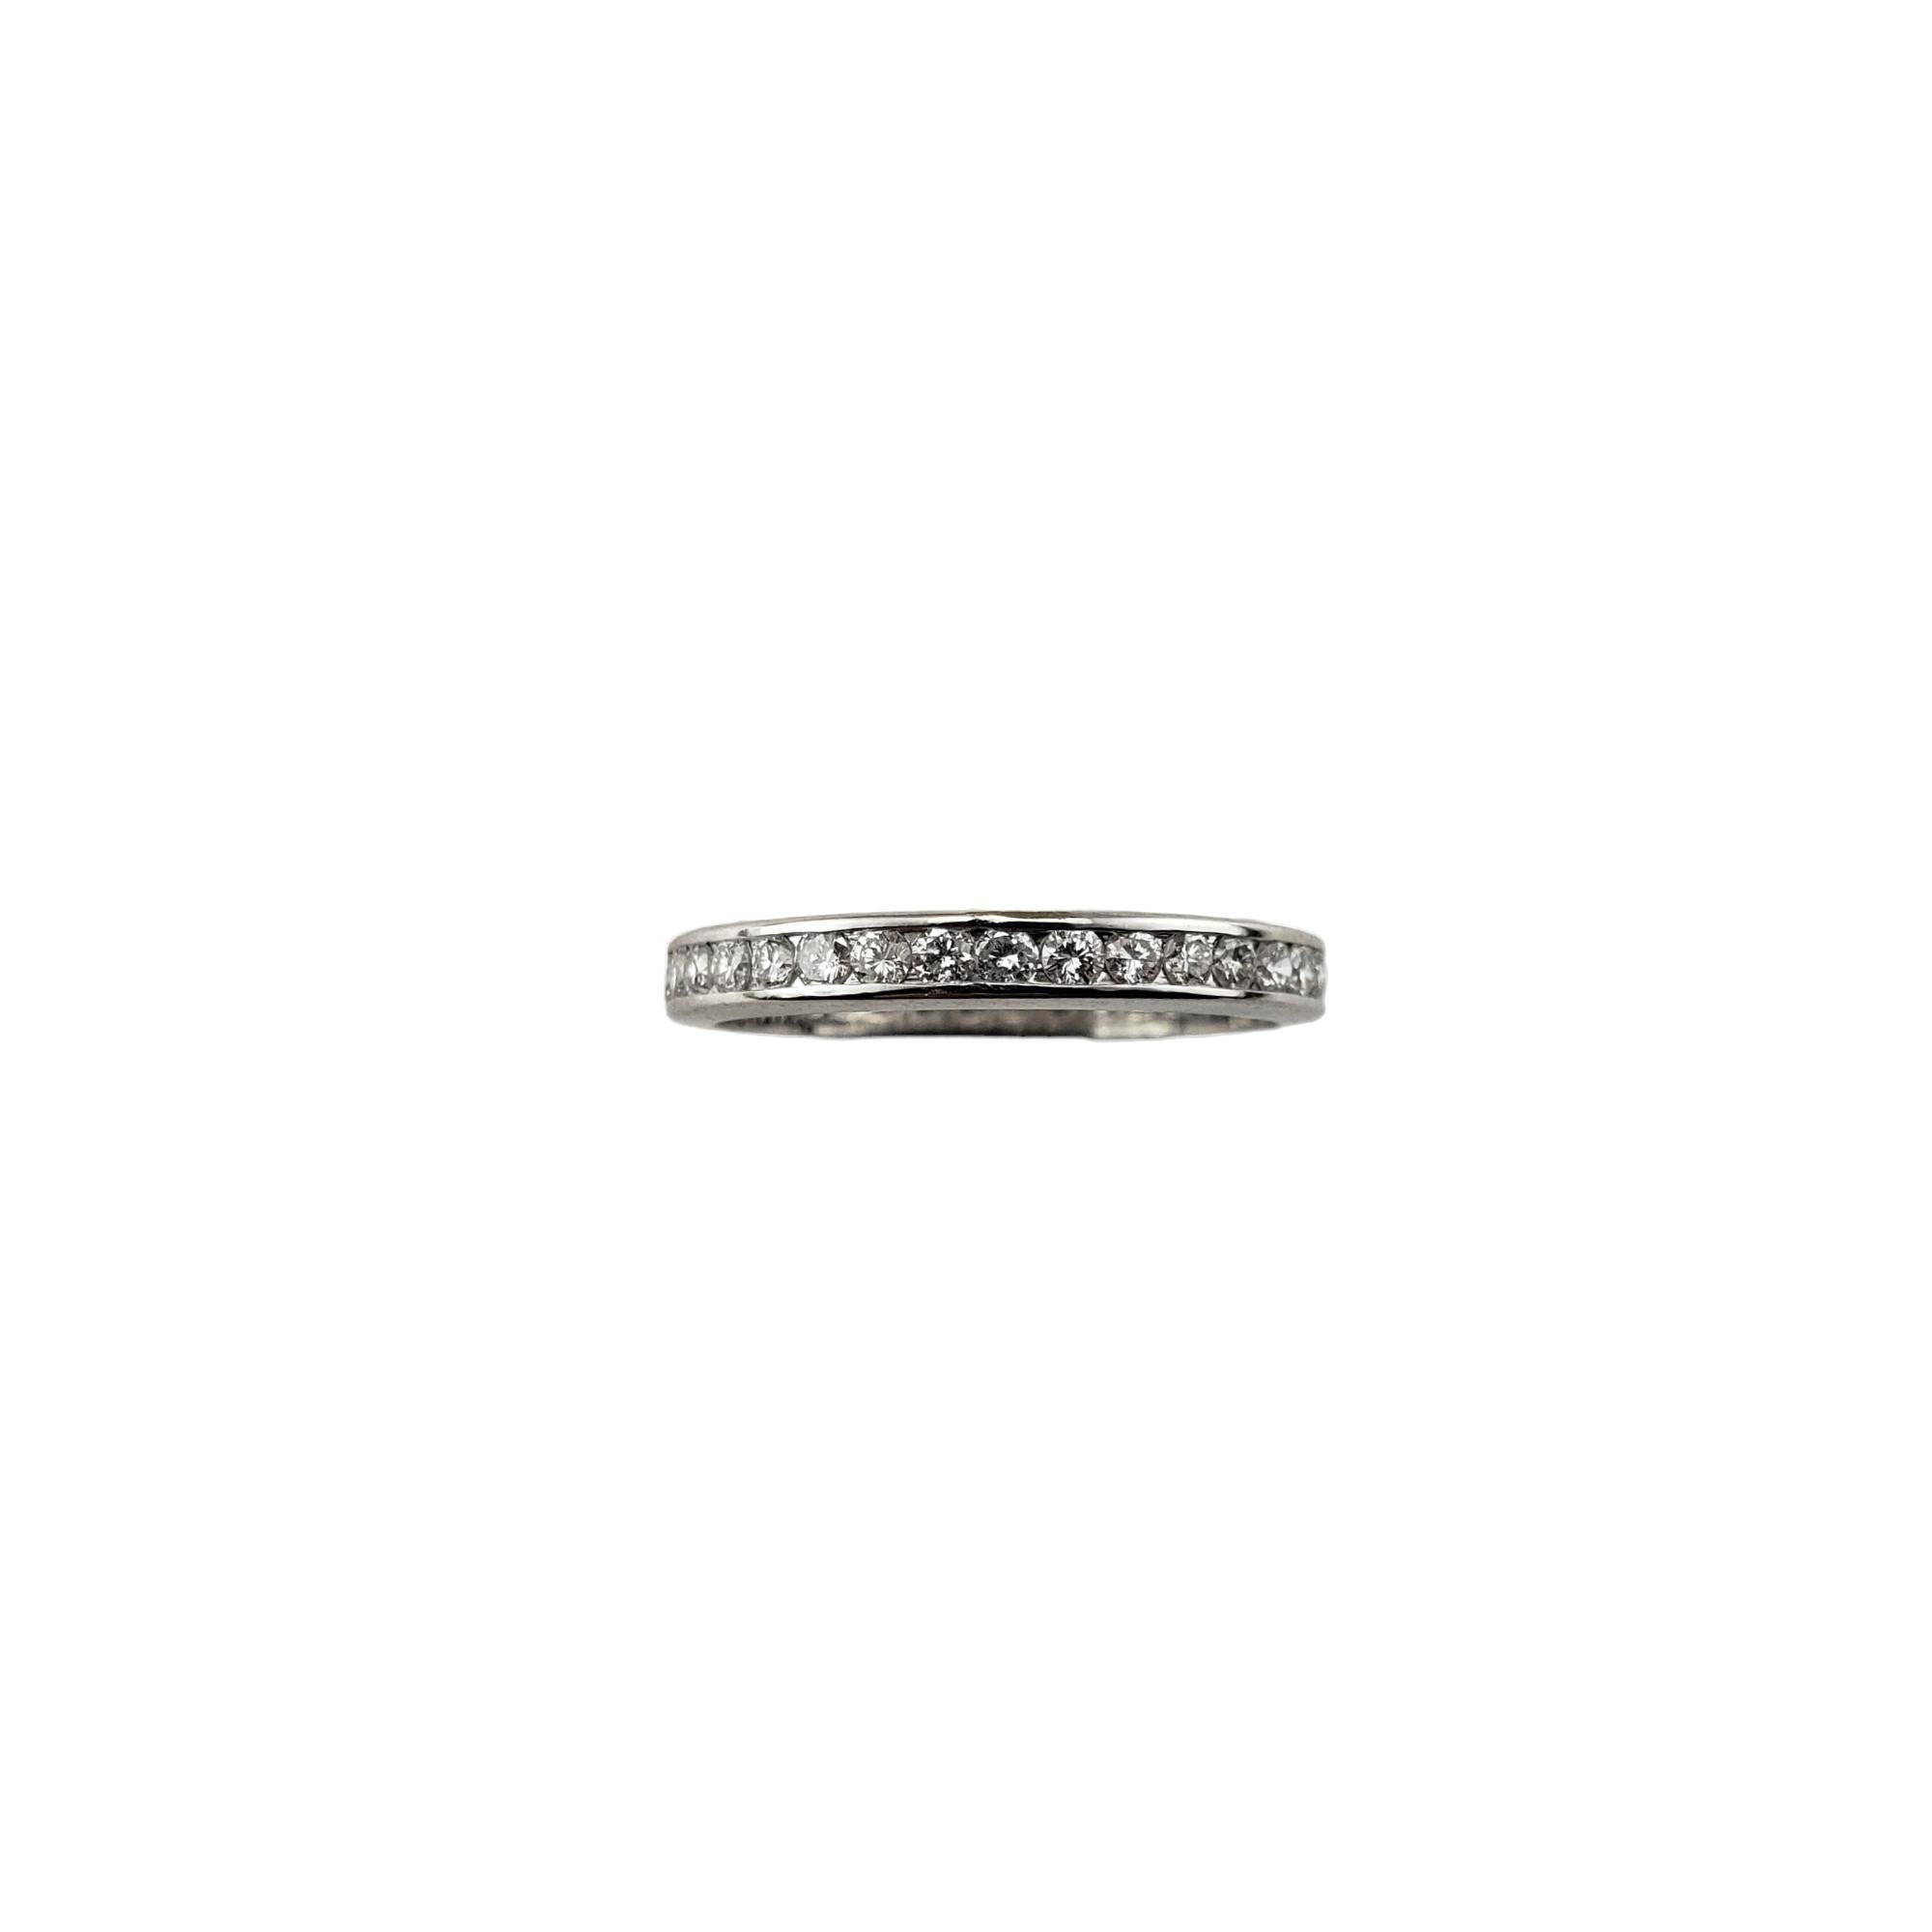 Vintage Platinum Diamond Eternity Band Size 7-

This sparkling band features 37 round brilliant cut diamonds set in classic platinum.  Width: 2.9 mm.

Approximate total diamond weight:  .74 ct.

Diamond clarity: VS2

Diamond color: G-H

Ring Size: